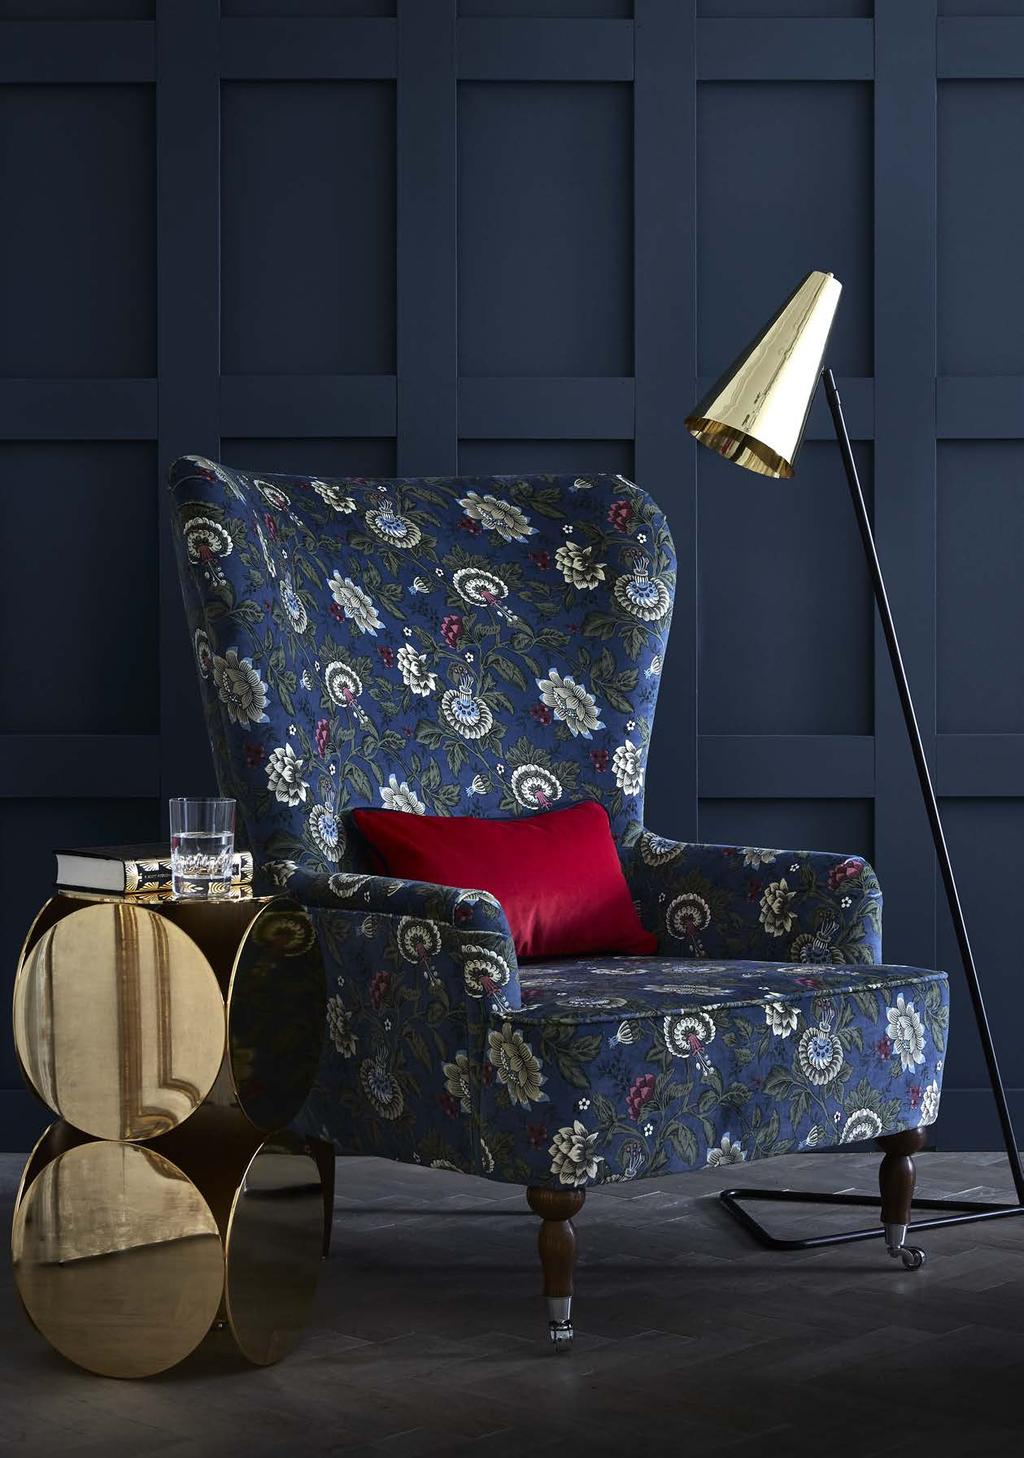 TONQUIN VELVET A sumptuous natural cotton velvet printed in two contemporary colour stories: teal with grey, and a rich indigo with mossy green detailing.